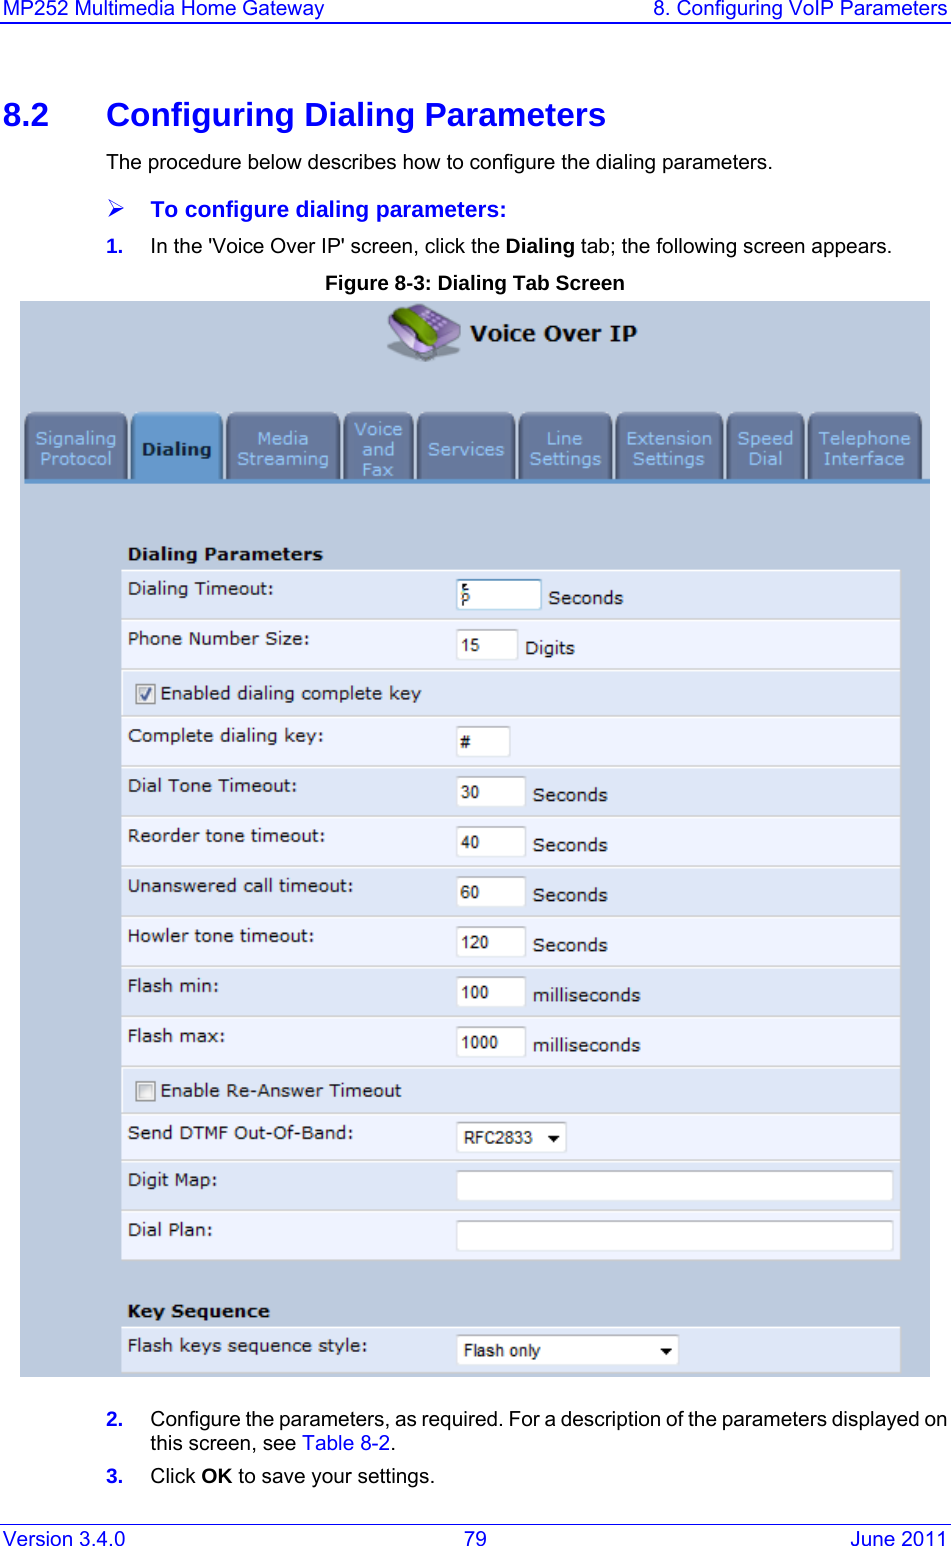 MP252 Multimedia Home Gateway  8. Configuring VoIP Parameters Version 3.4.0  79  June 2011 8.2  Configuring Dialing Parameters The procedure below describes how to configure the dialing parameters. ¾ To configure dialing parameters: 1.  In the &apos;Voice Over IP&apos; screen, click the Dialing tab; the following screen appears.  Figure 8-3: Dialing Tab Screen  2.  Configure the parameters, as required. For a description of the parameters displayed on this screen, see Table 8-2. 3.  Click OK to save your settings. 